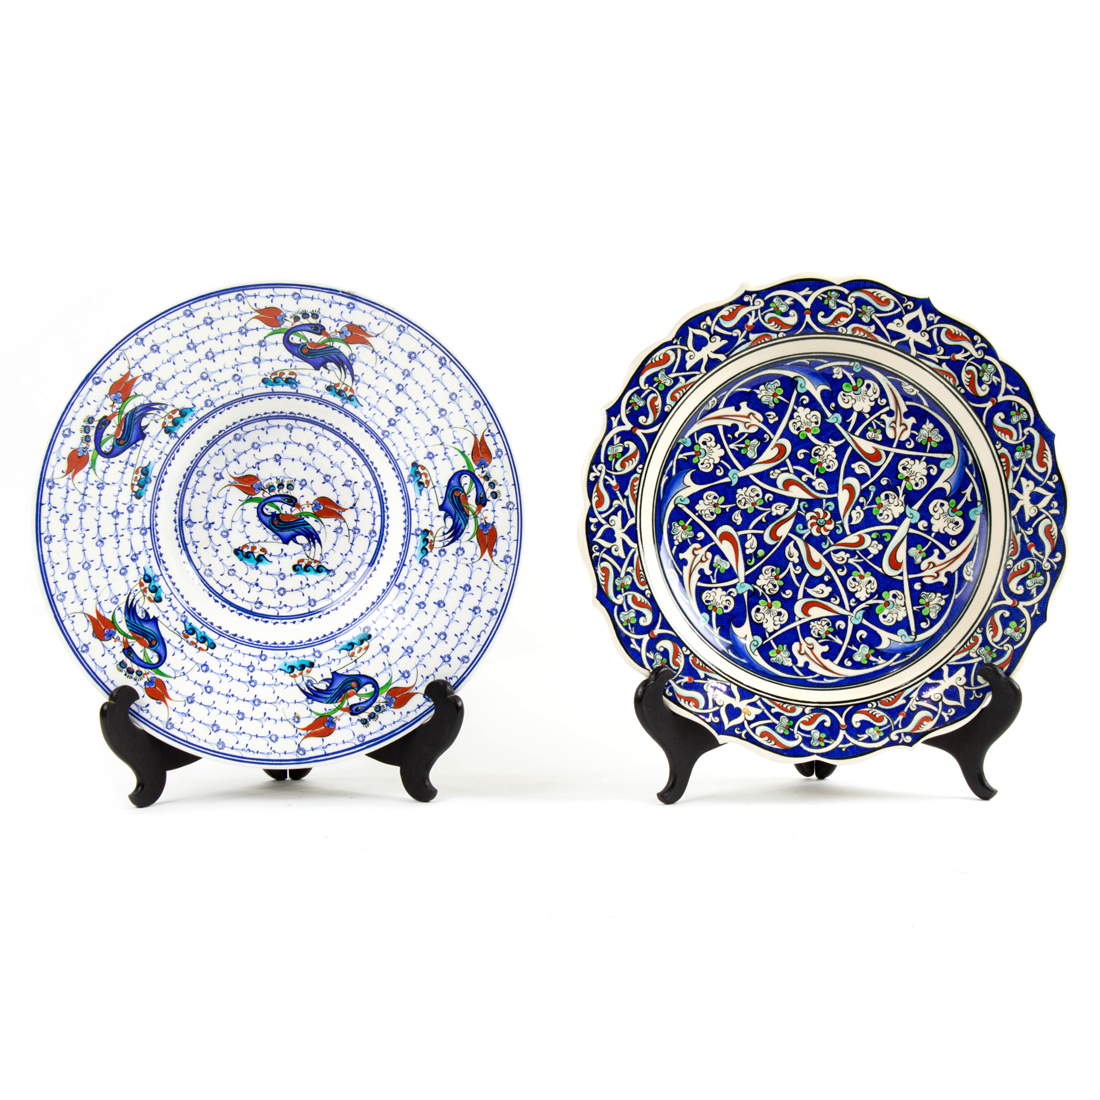 TWO TURKISH IZNIK CHARGERS Two 3a238e